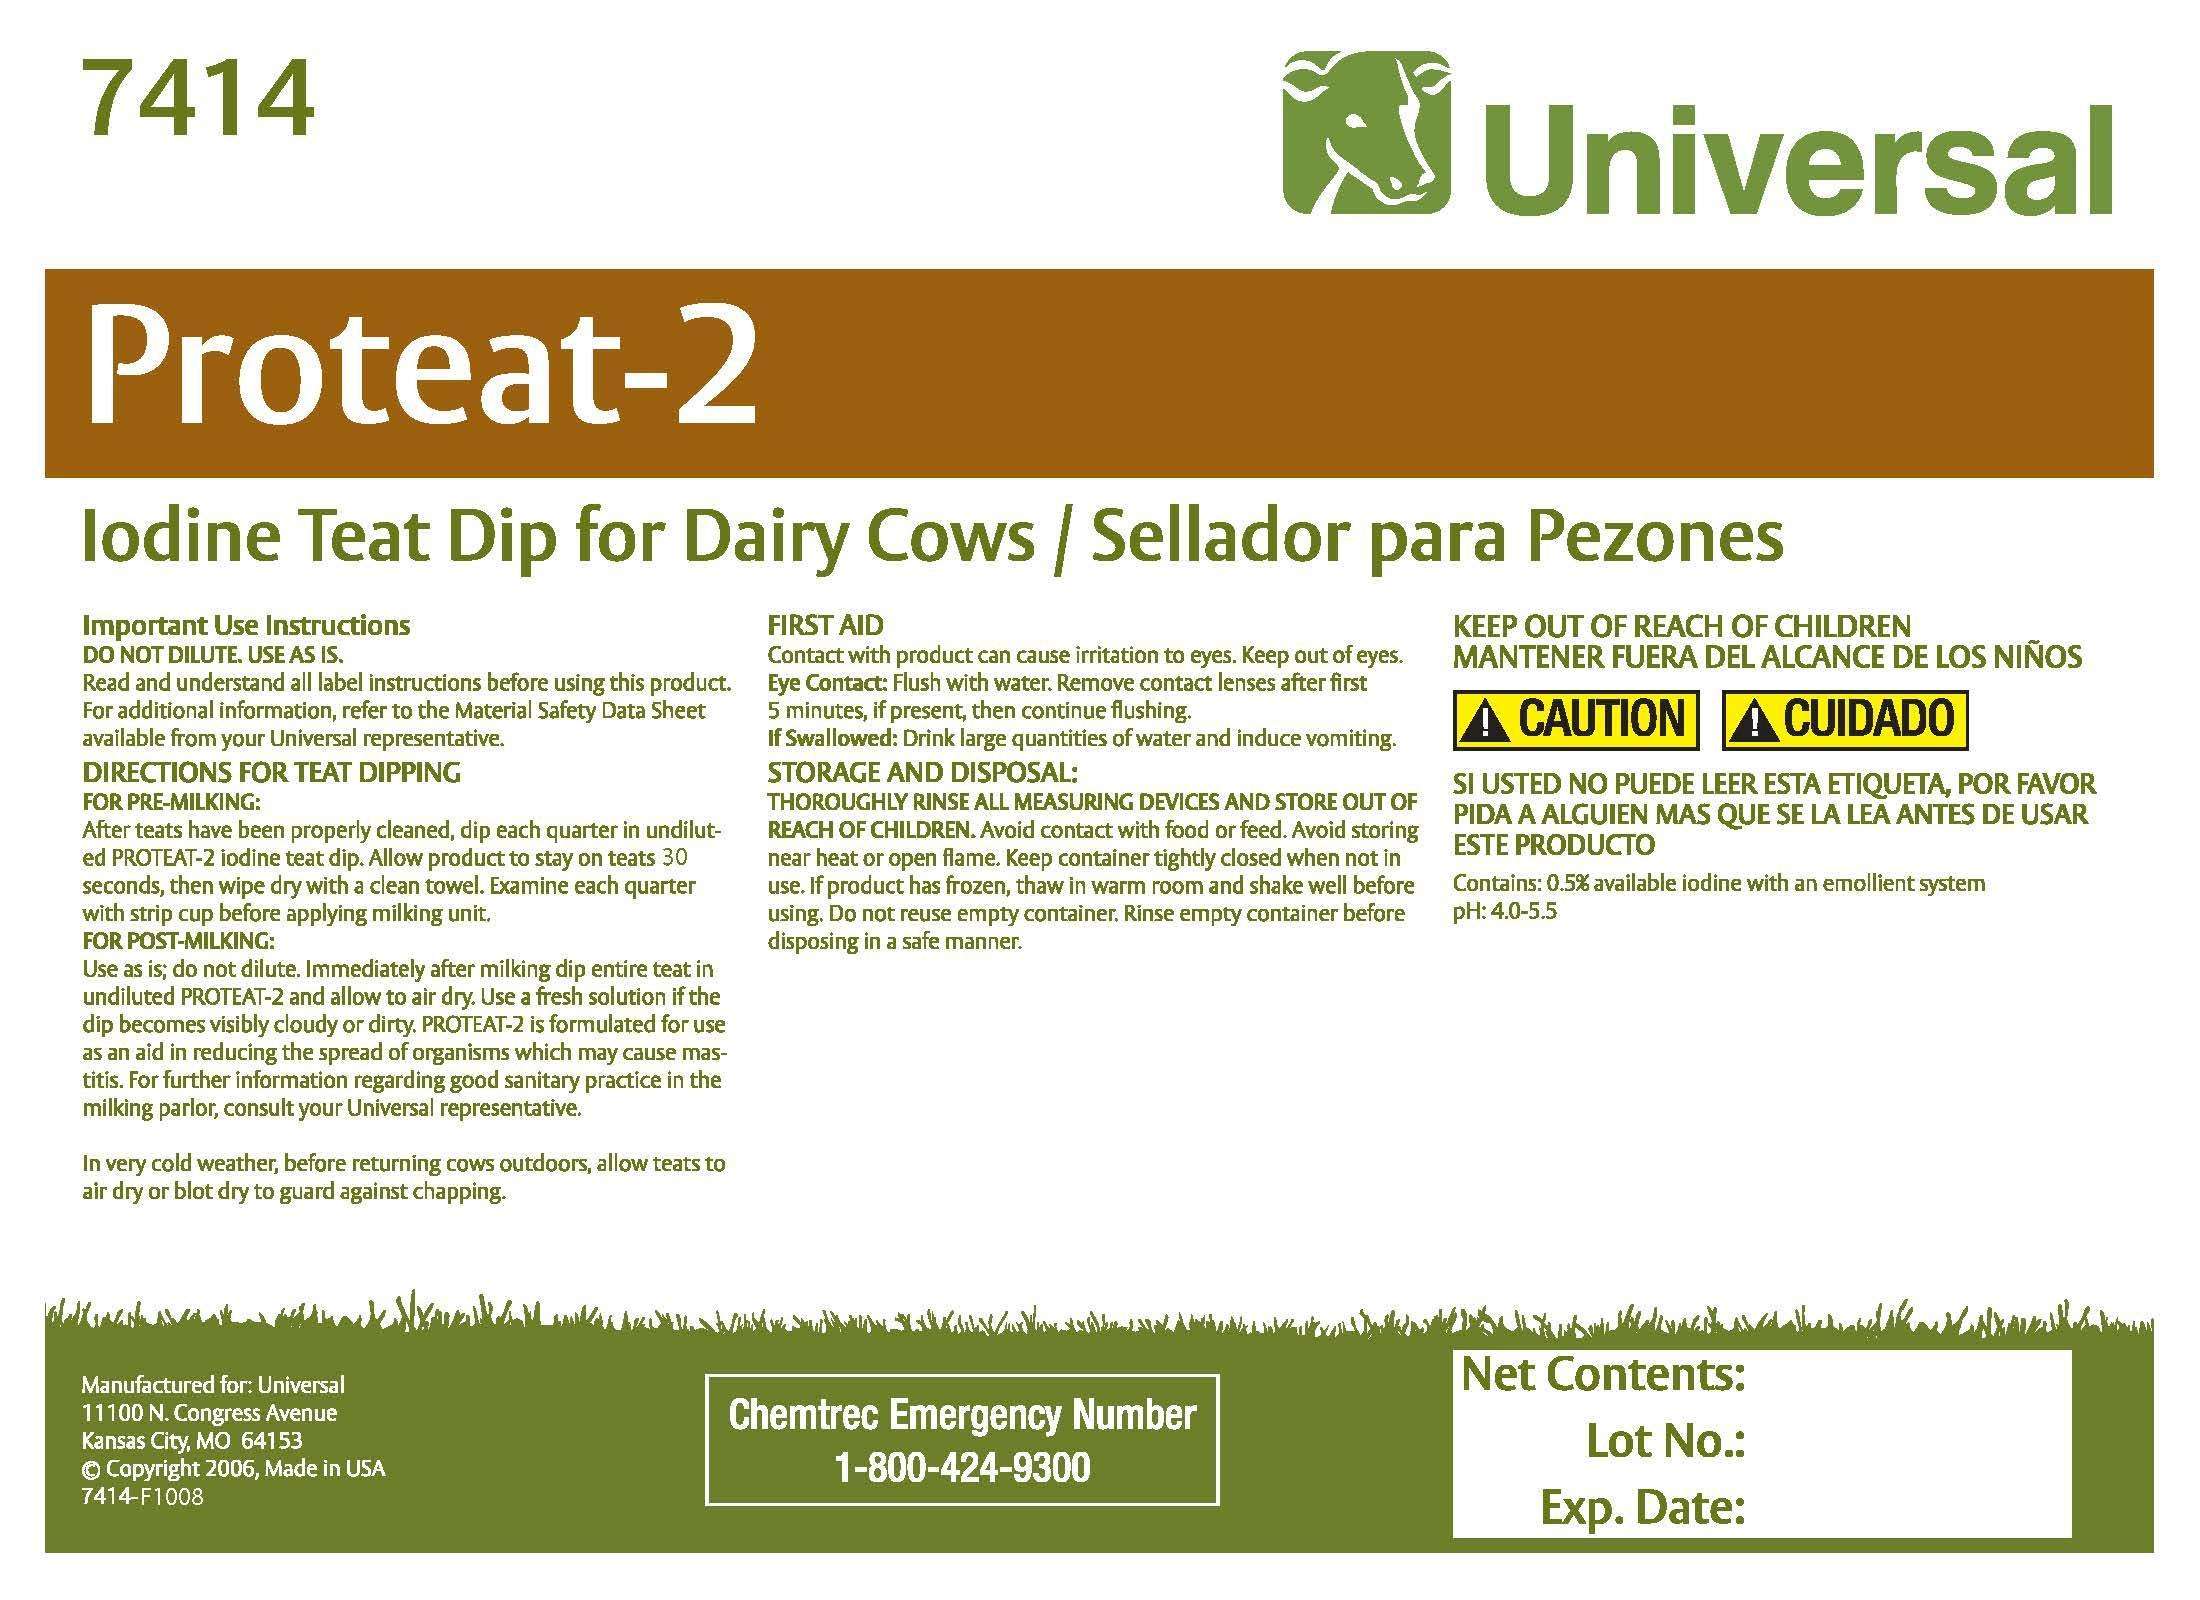 Proteat-2